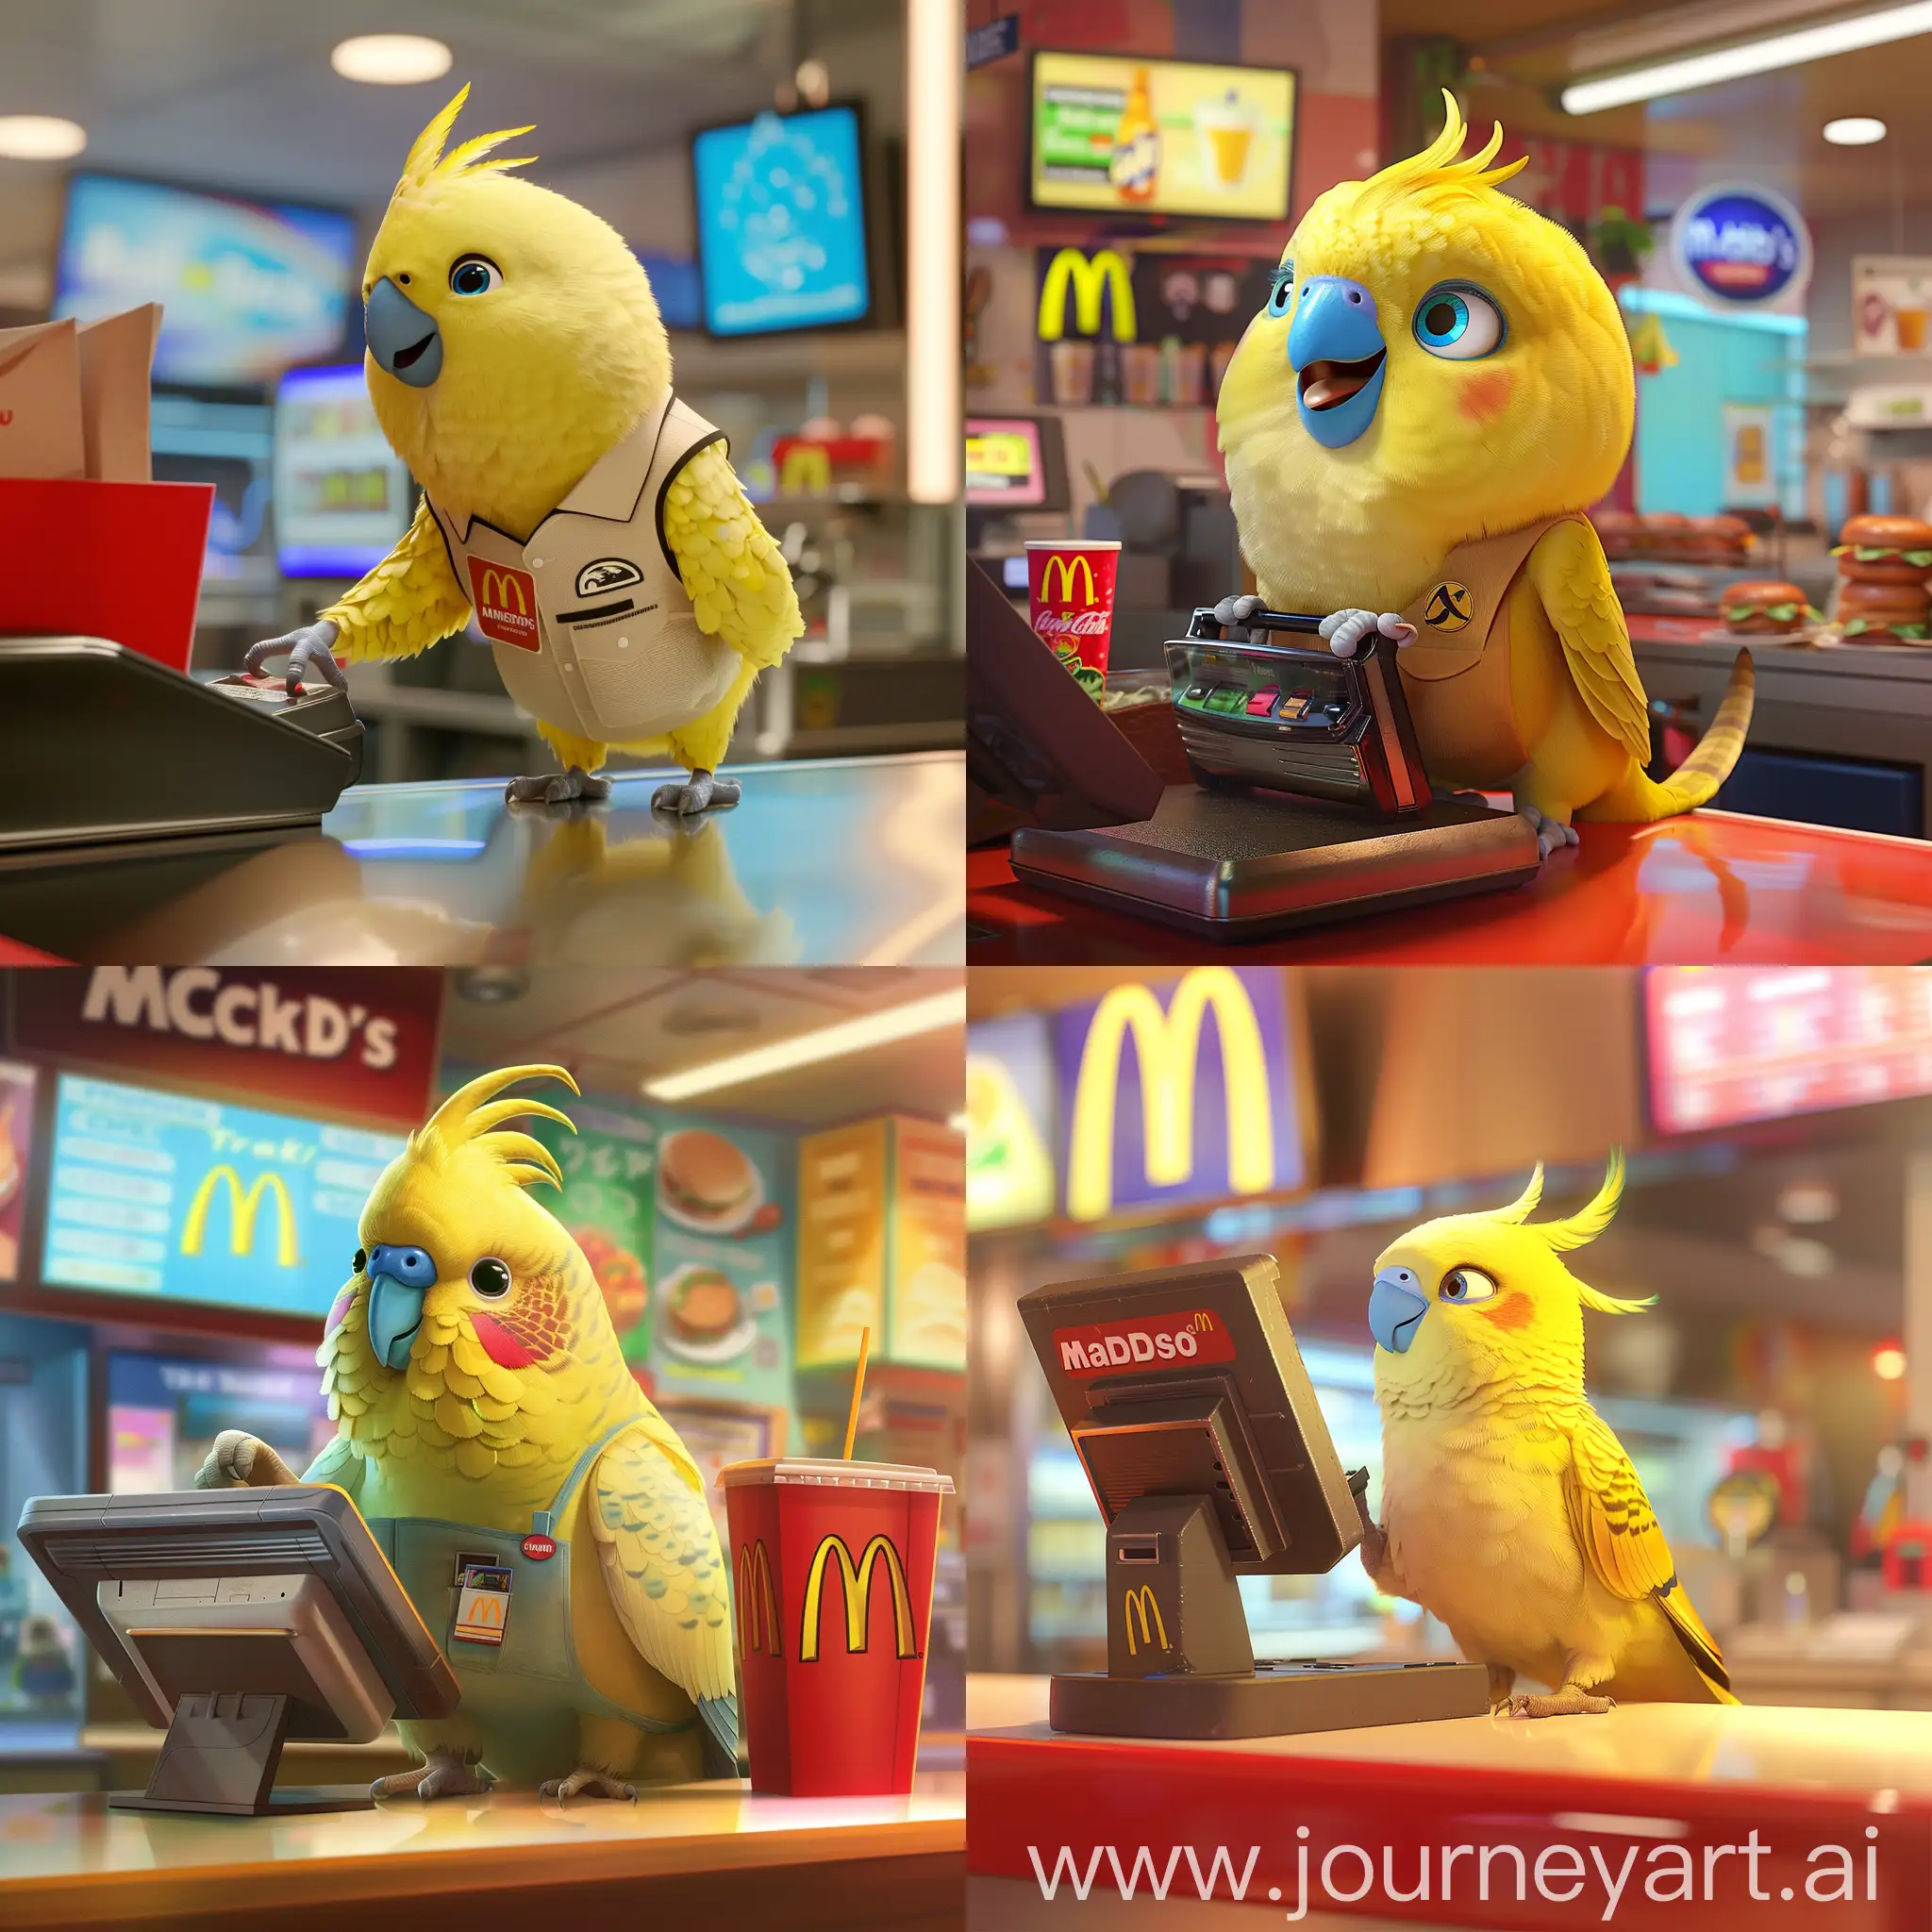 Create a cartoon-style image of an adorable pale yellow budgerigar with a bright blue nose. It's wearing a McDonald's uniform and cheerfully operating a cash register inside a McDonald's restaurant. The scene is vibrant, colorful, and exudes a playful, friendly atmosphere